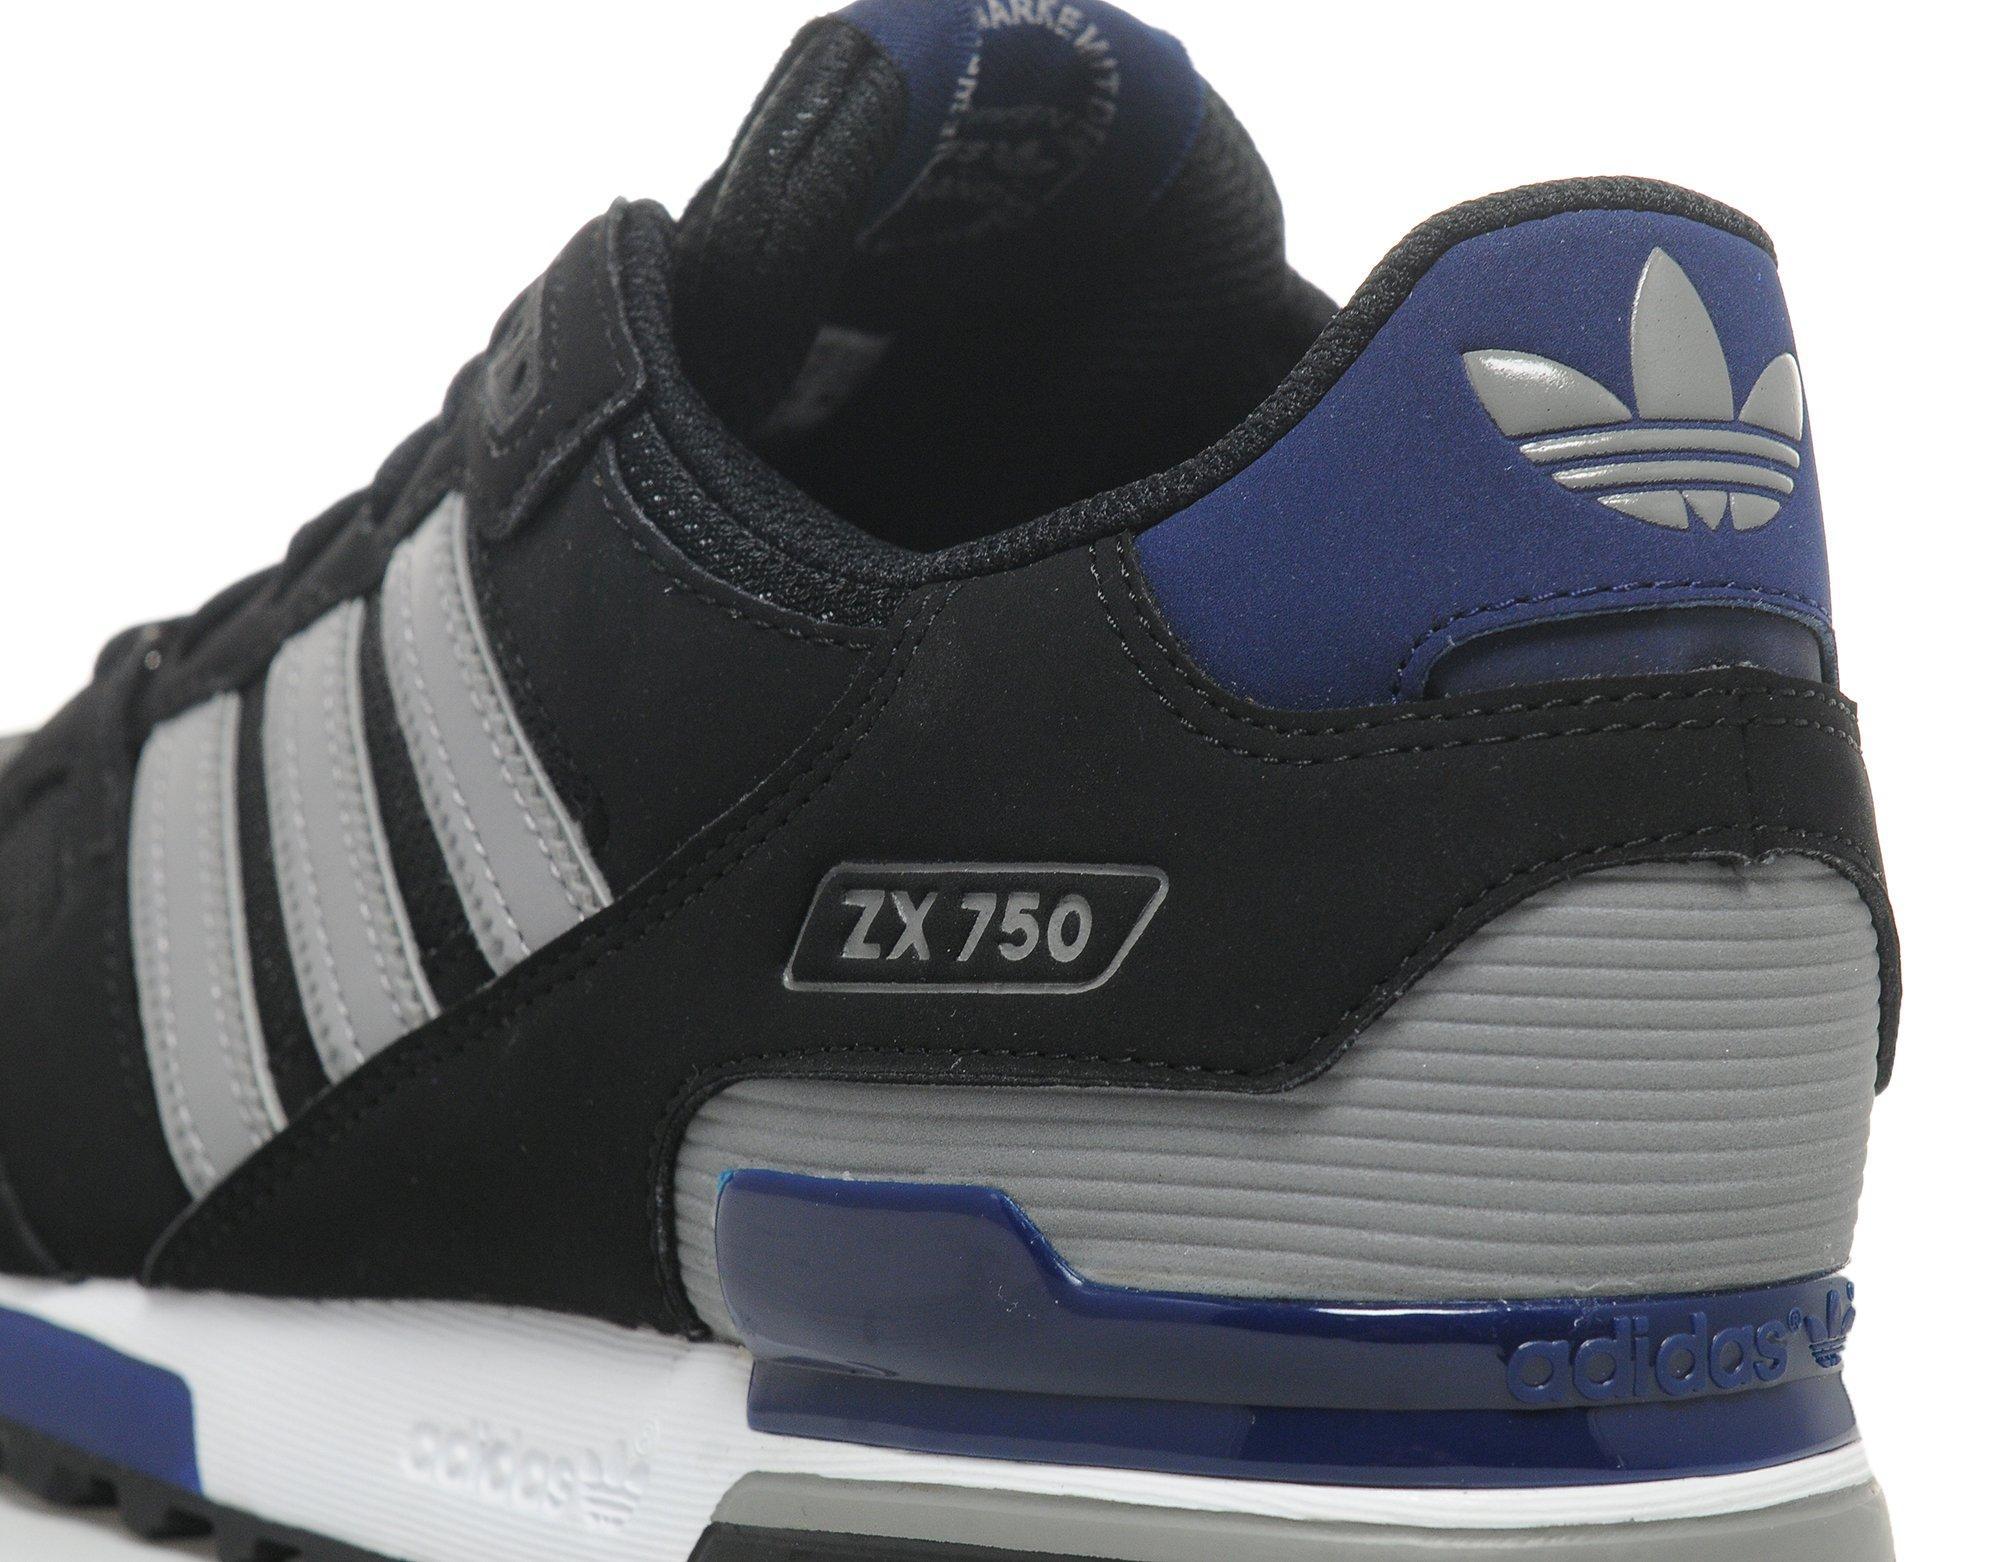 Jd Sports Zx 750 Online Store, UP TO 61% OFF